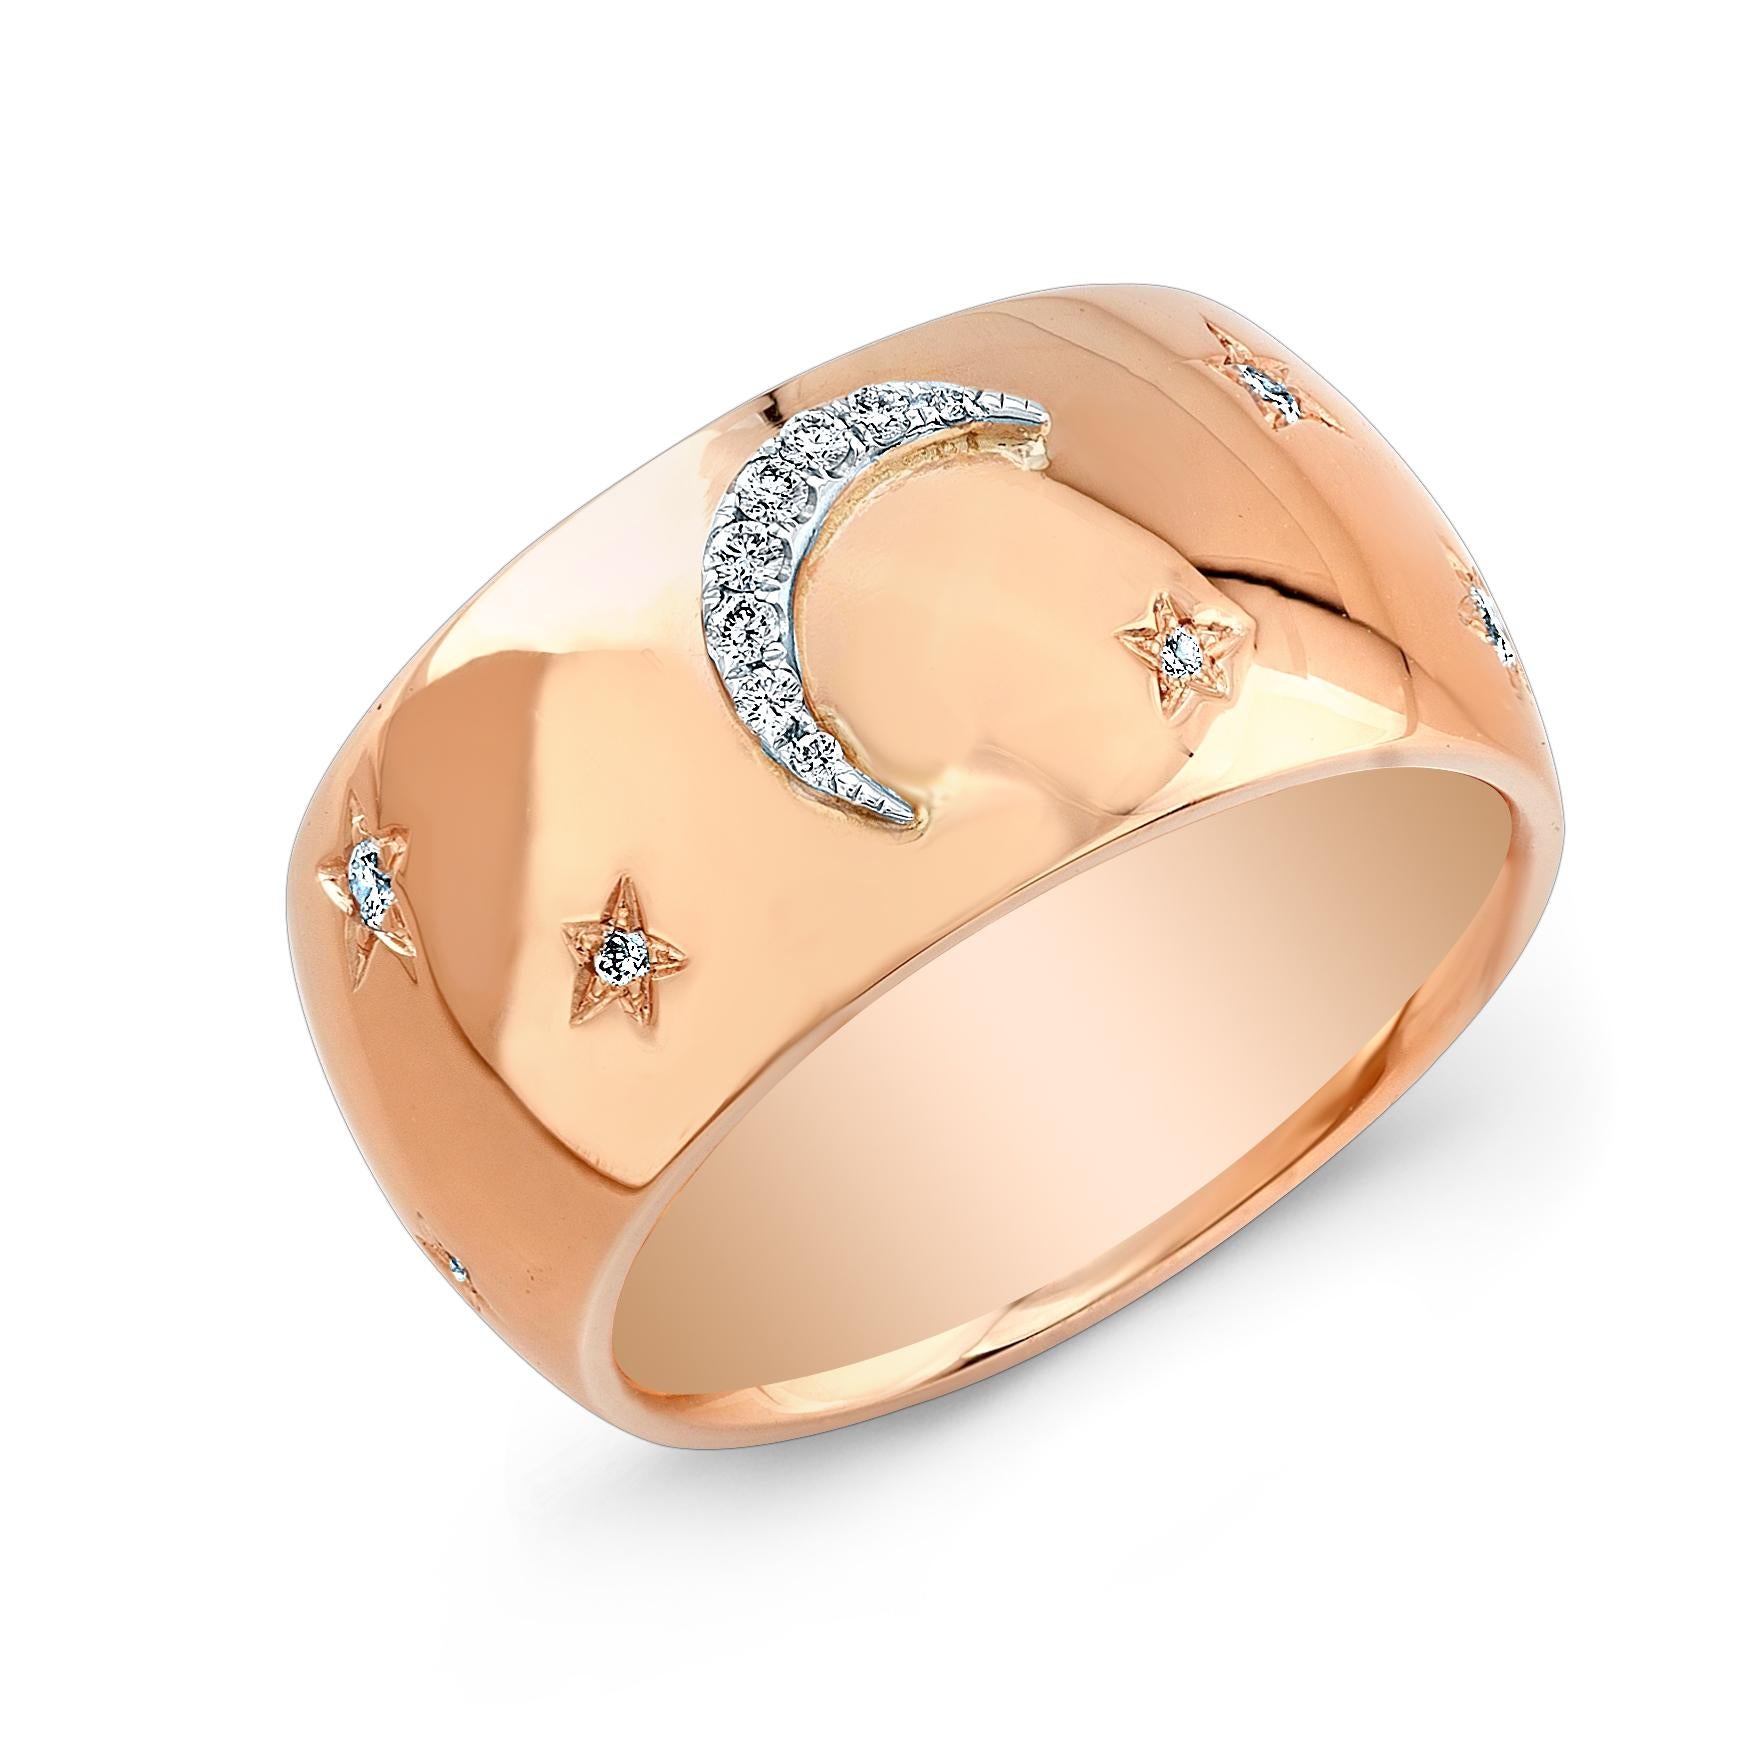 Amy Y's contemporary 18K-rose and yellow gold and diamond sun, moon and stars ring Chloe is a present day gem. Set in a celestial universe illuminated with bright stars, sprinkled with white diamonds floating about a warm natural yellow diamond sun